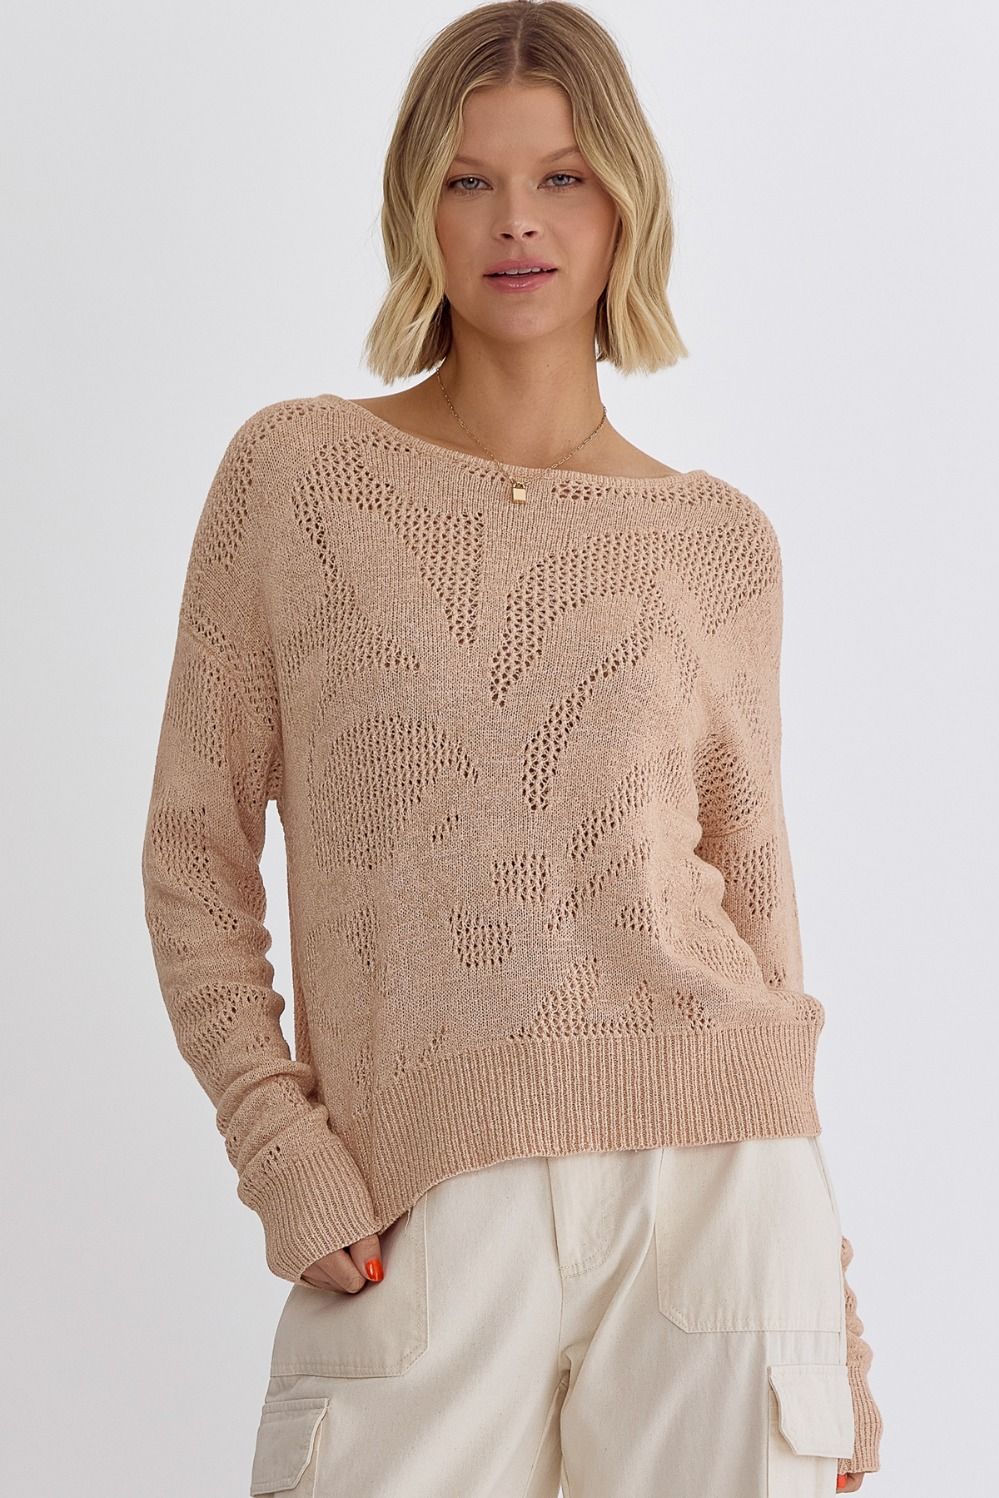 Ava Long Sleeve Open Knit Palm Frond Knit Sweater - Light Taupe